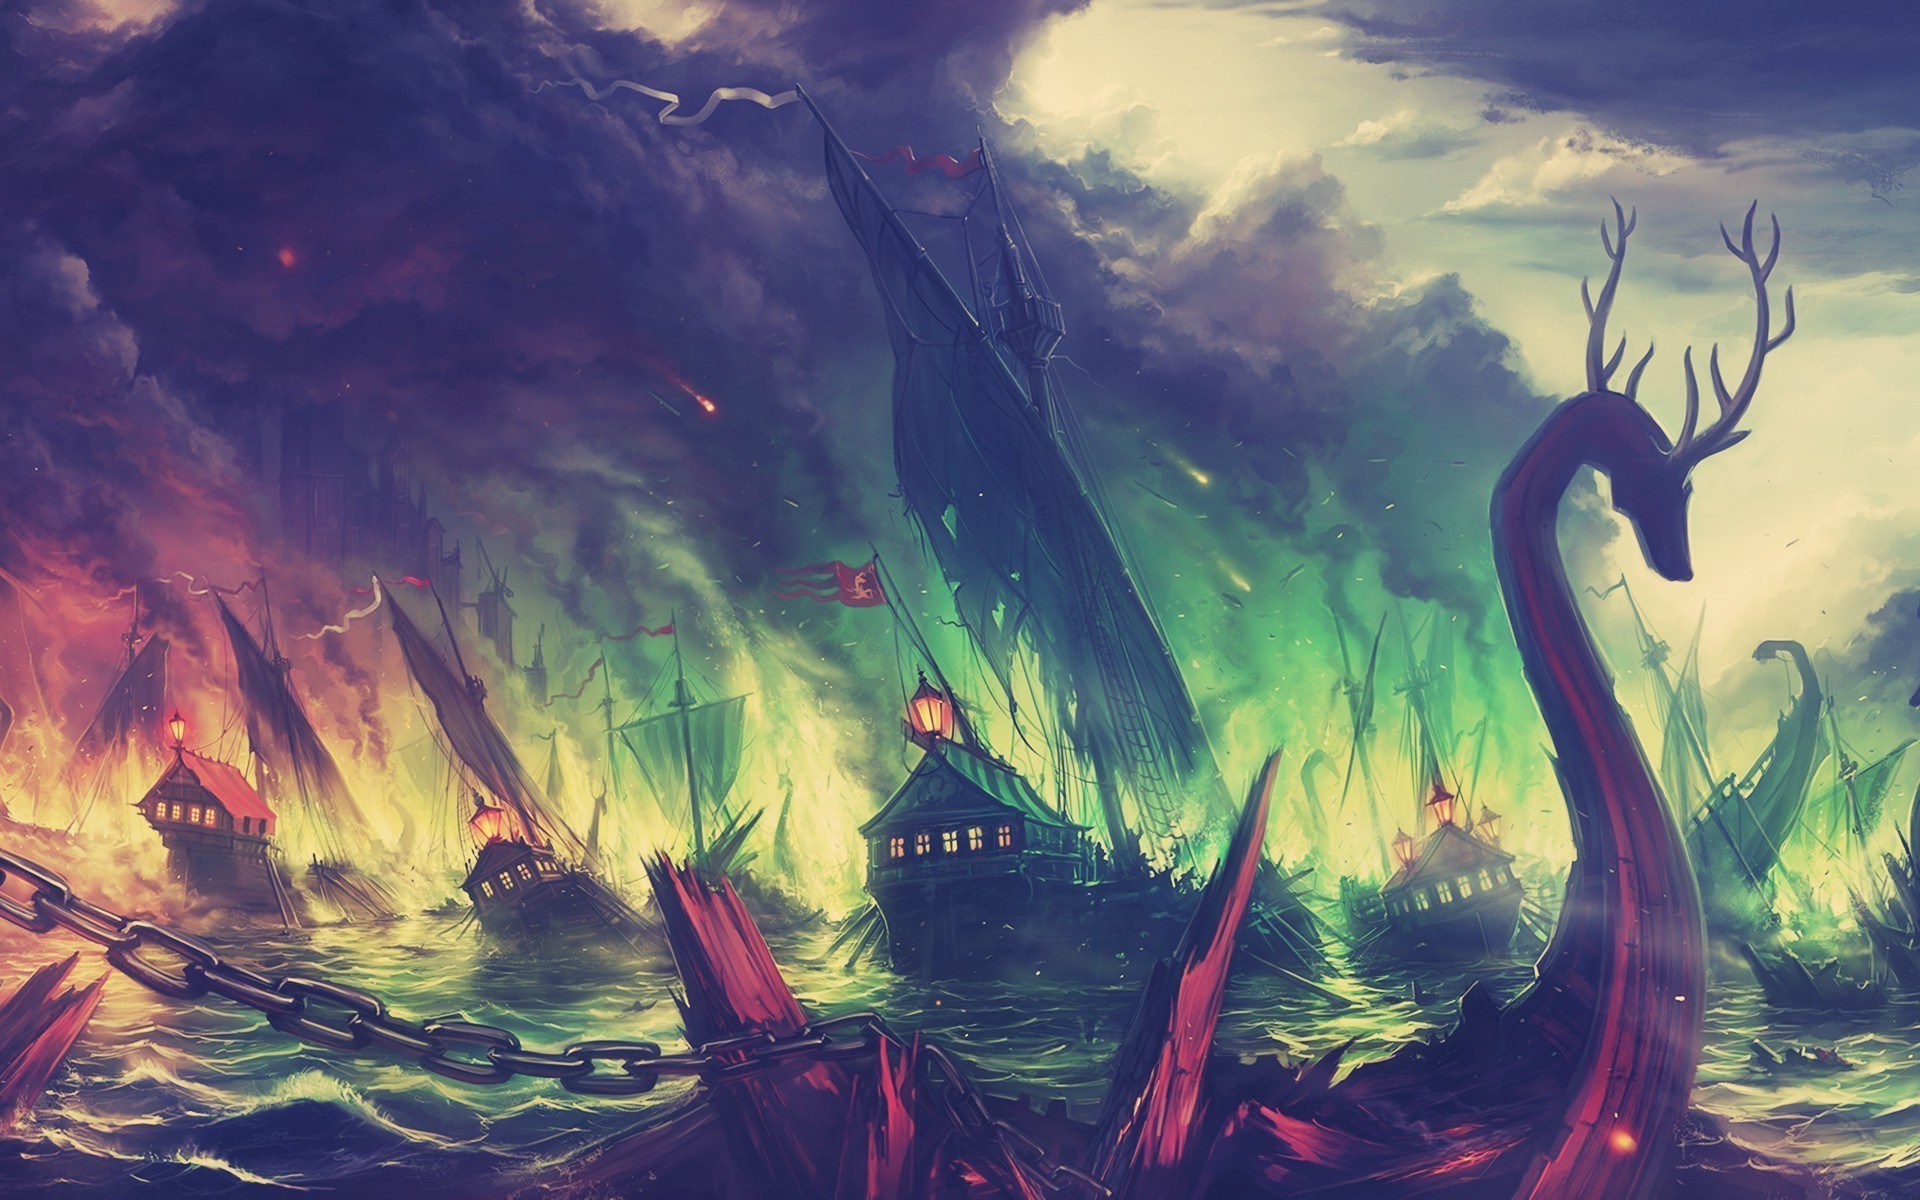 fantasy Art, Game Of Thrones, Blackwater, Fire, Boat, Colorful, Mountain, Landscape, Fall Wallpaper